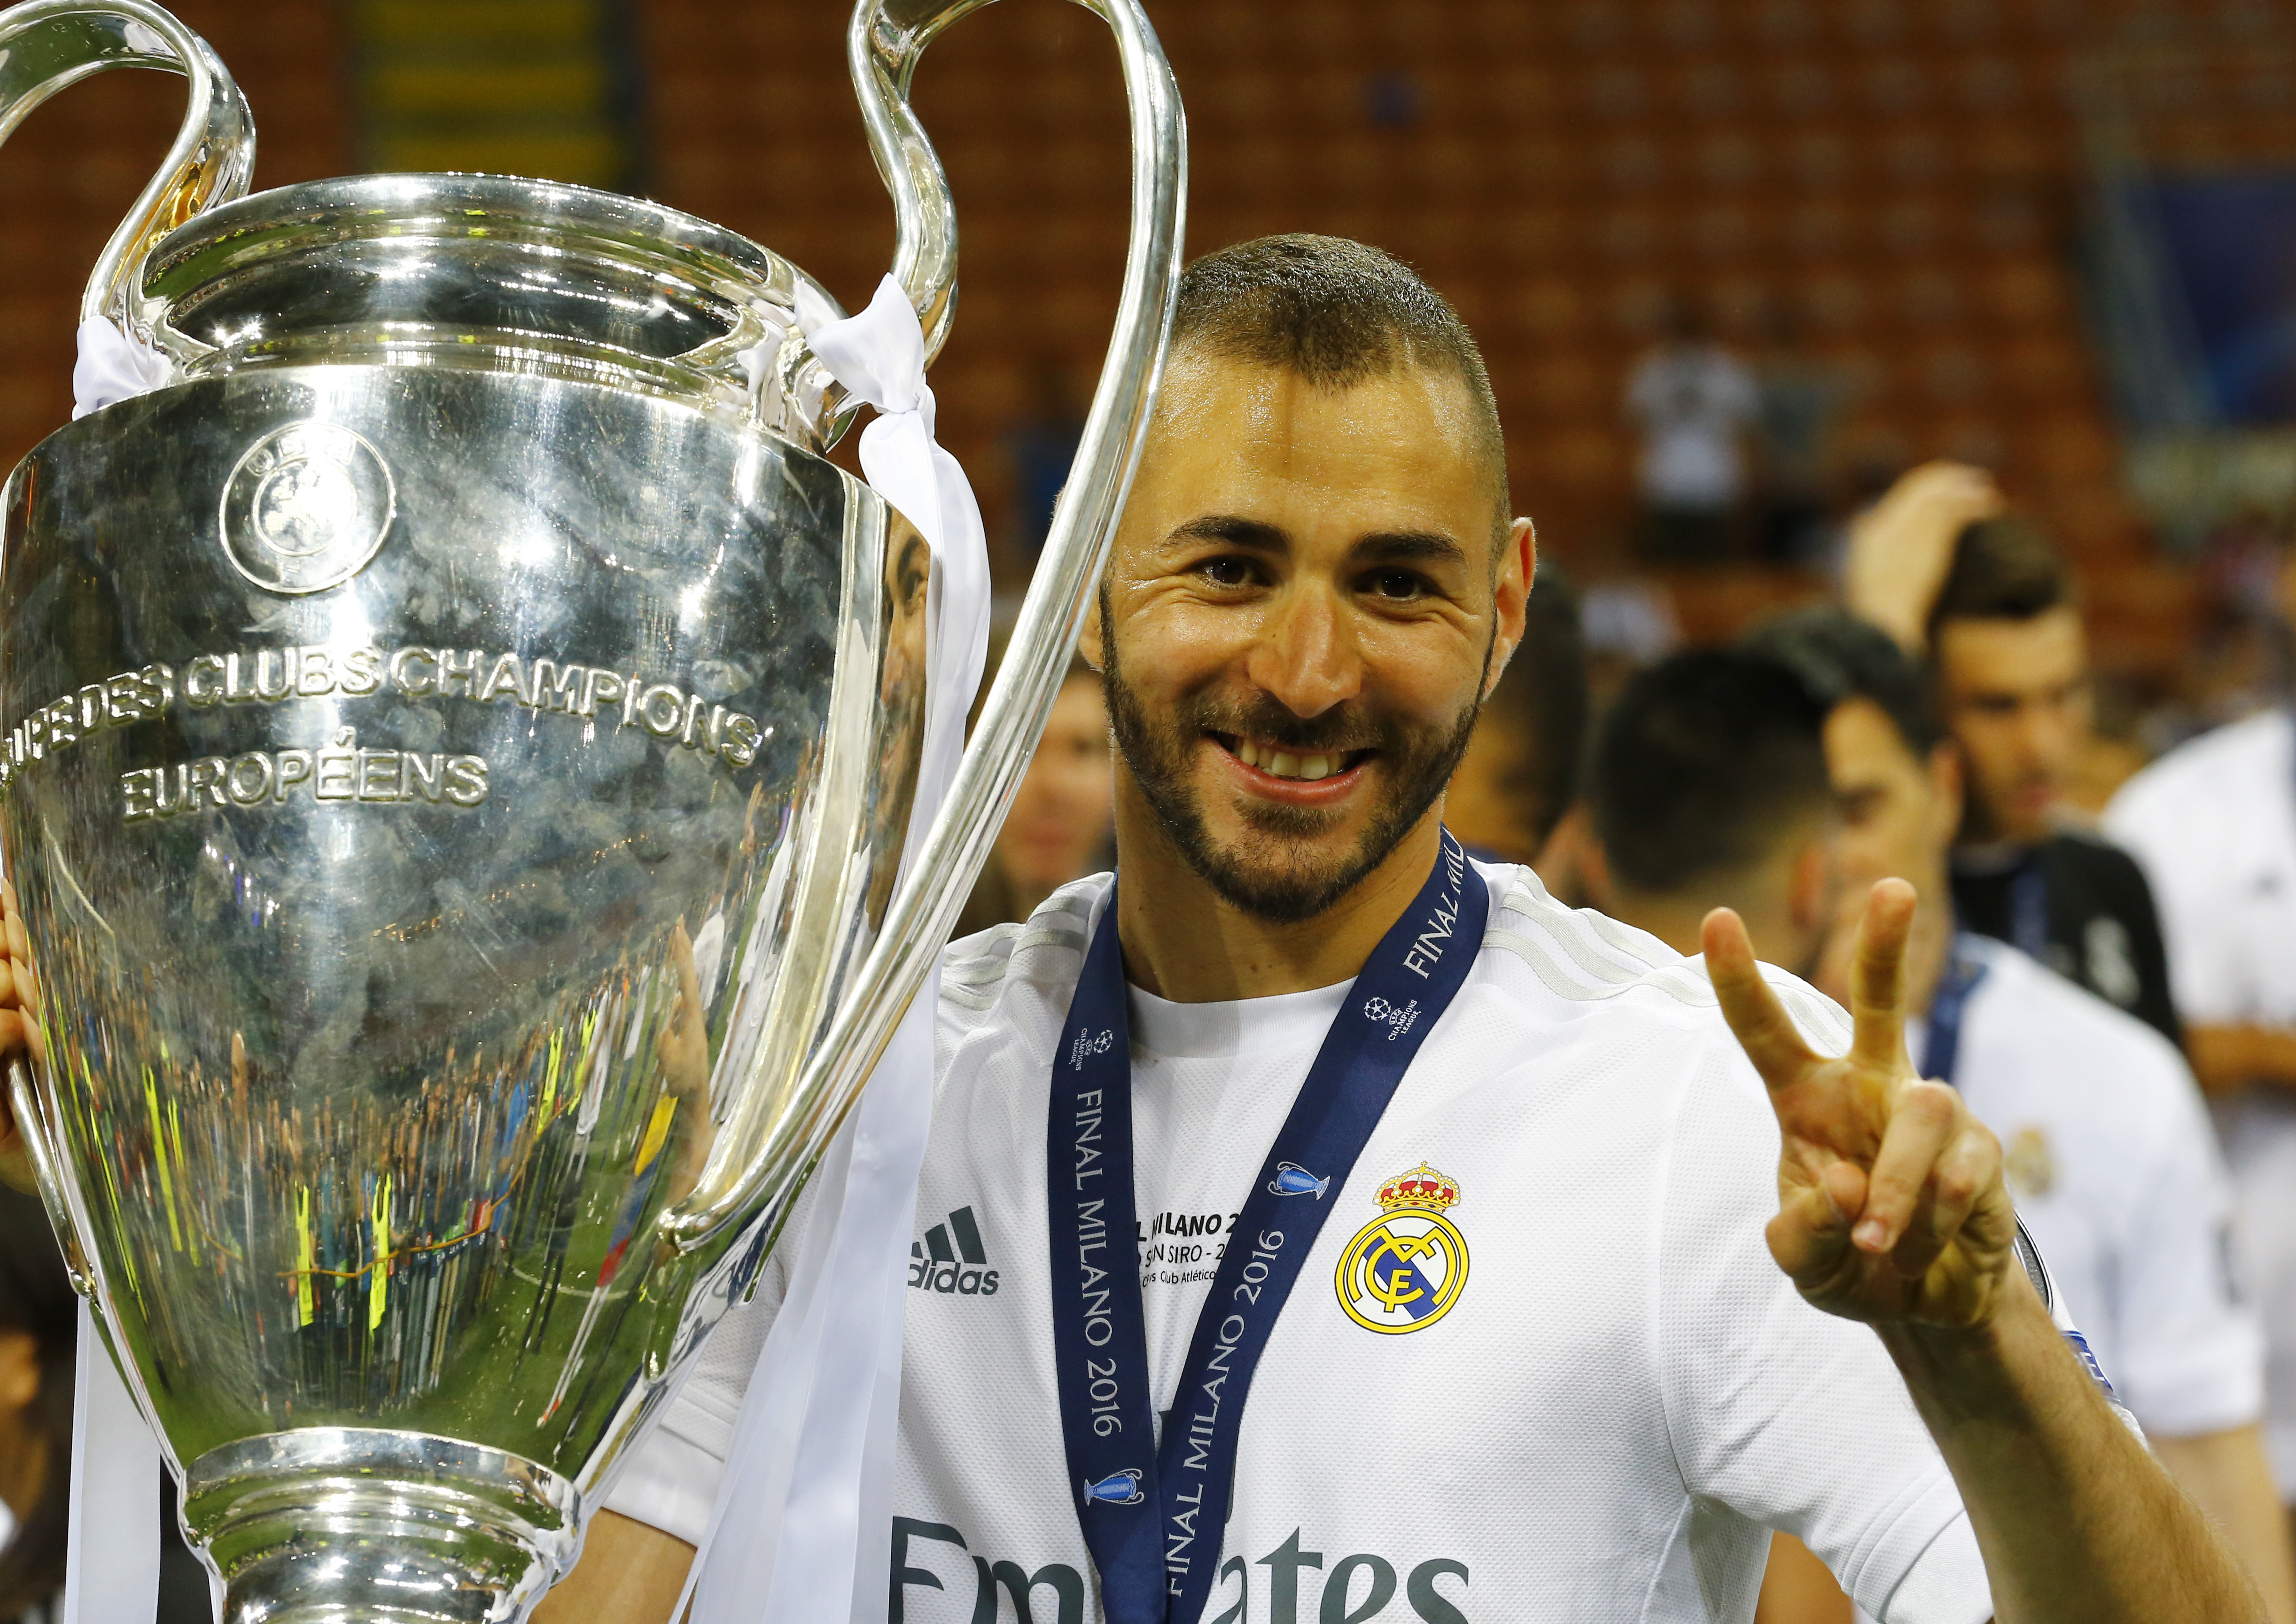 Soccer Football - Atletico Madrid v Real Madrid - UEFA Champions League Final - San Siro Stadium, Milan, Italy - 28/5/16 Real Madrid's Karim Benzema celebrates with the trophy after winning the UEFA Champions League Reuters / Stefano Rellandini Livepic EDITORIAL USE ONLY.